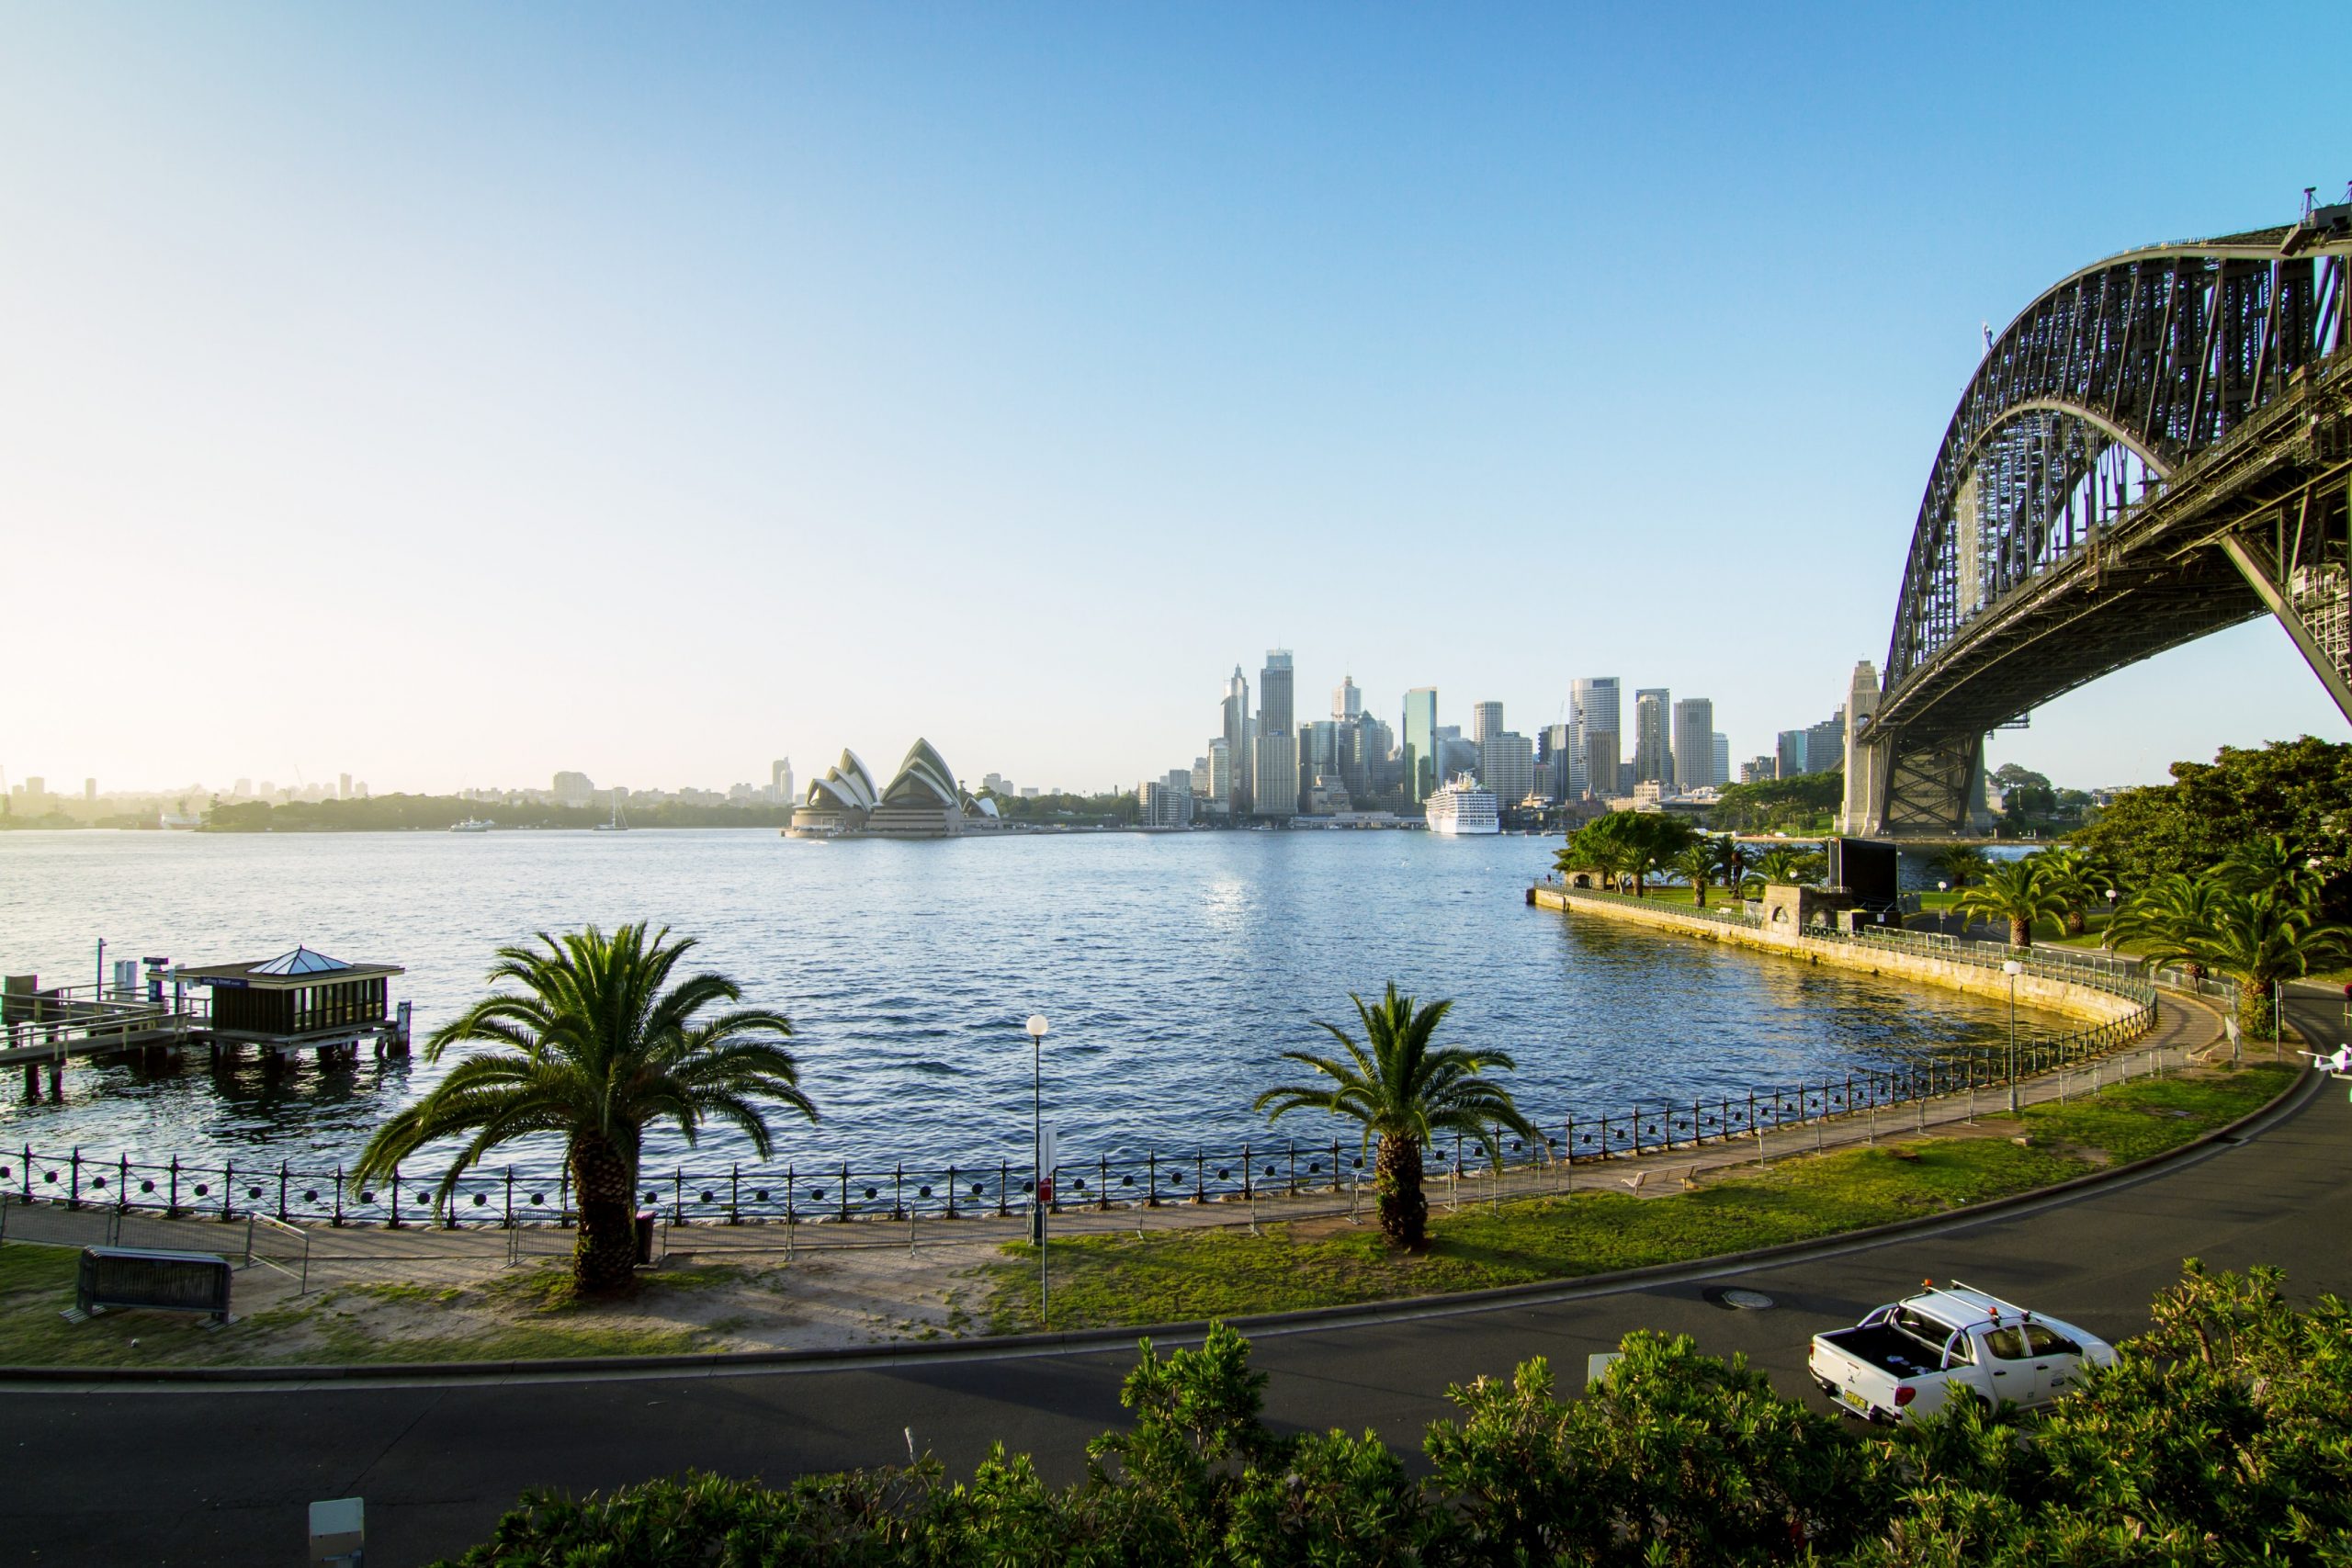 Most liveable suburbs in Sydney - is your suburb on the list?